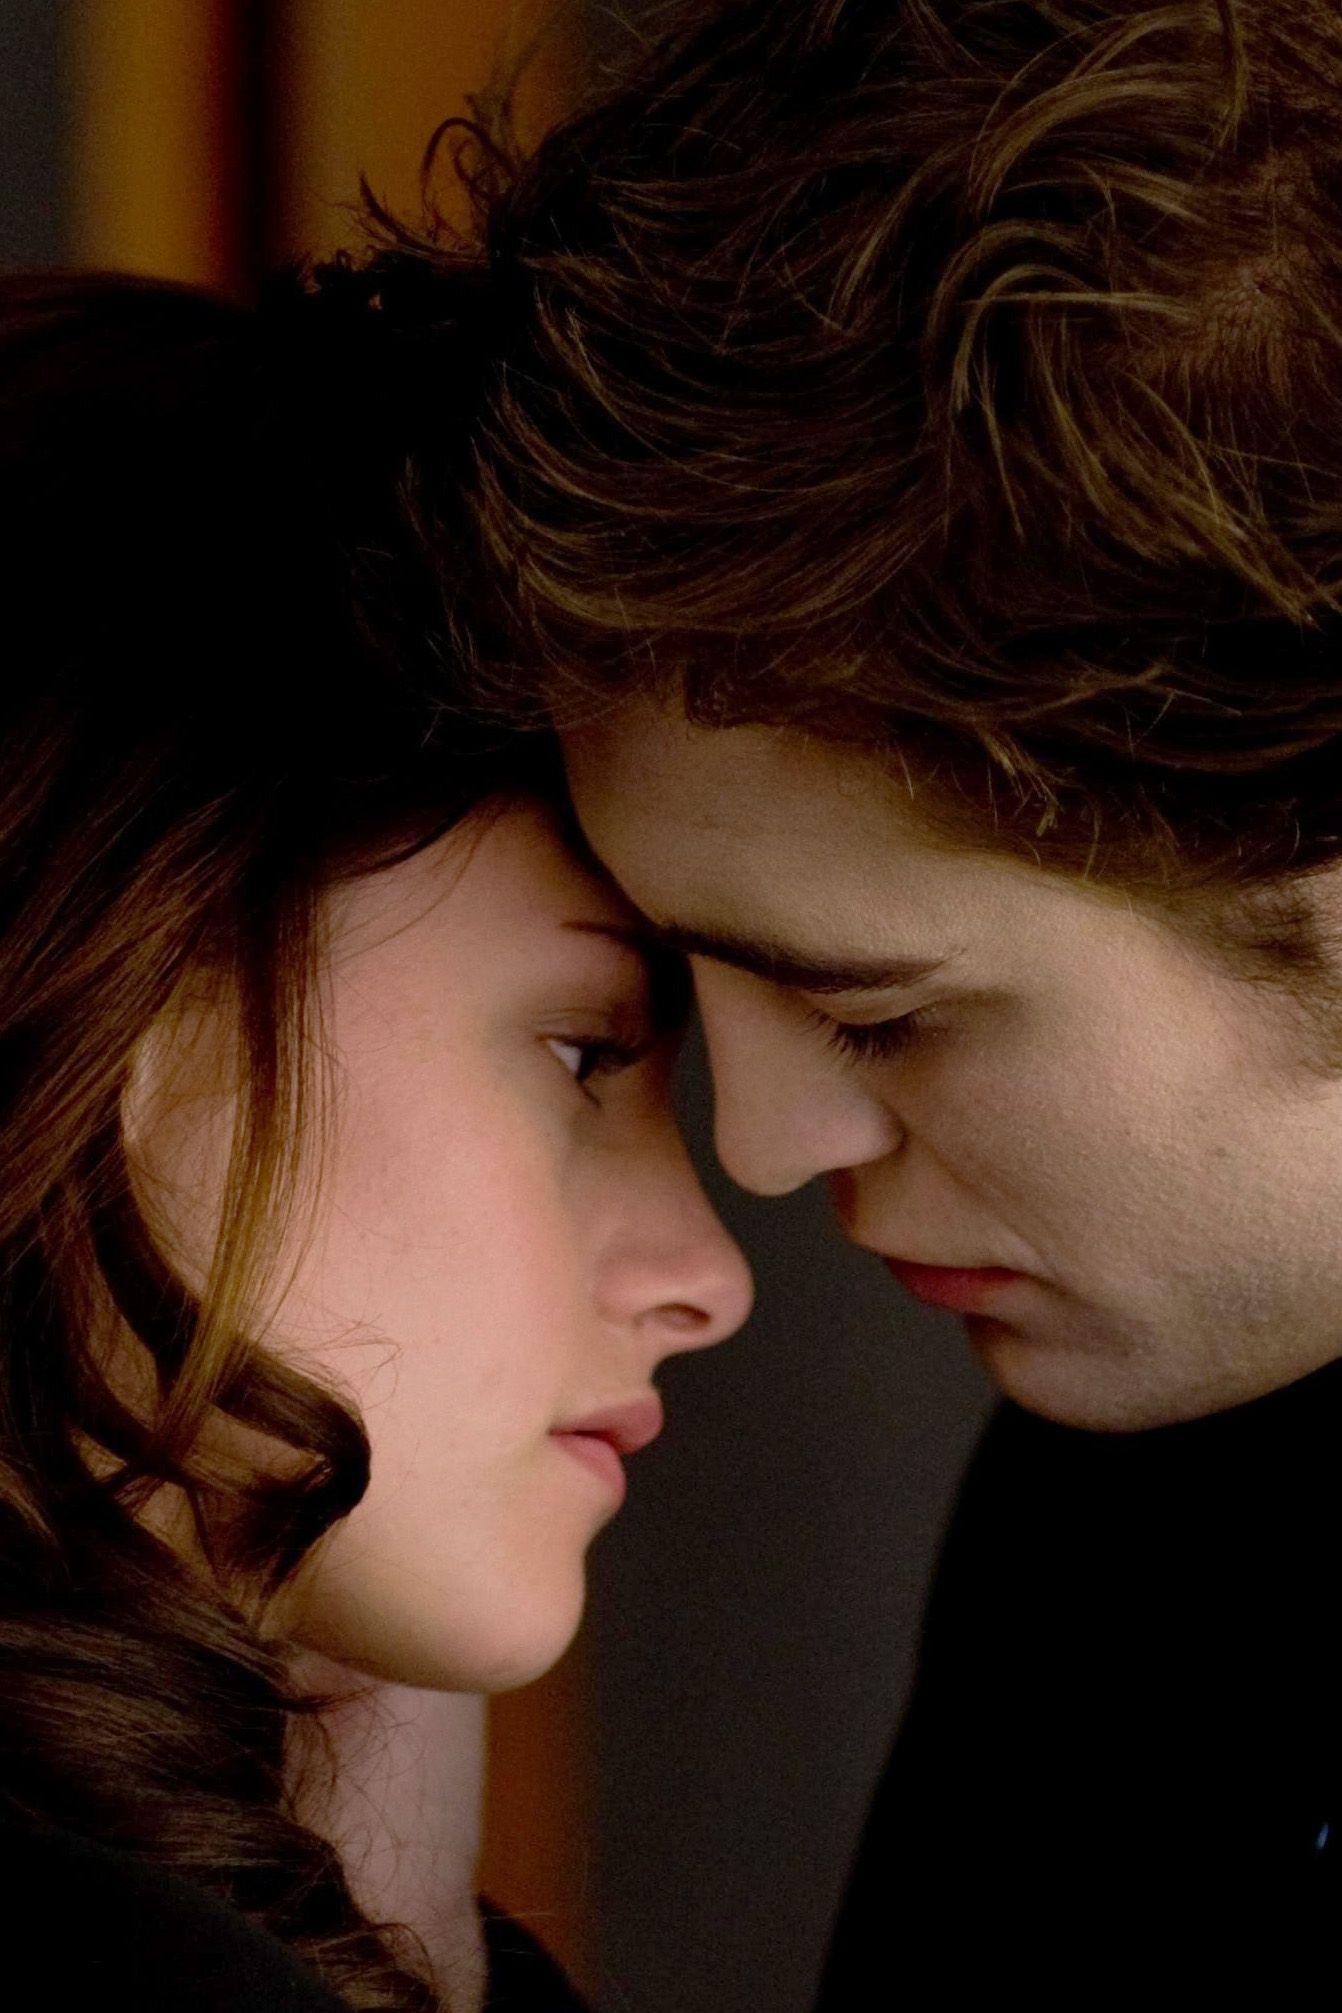 Is edward cullen and bella swan dating in real life